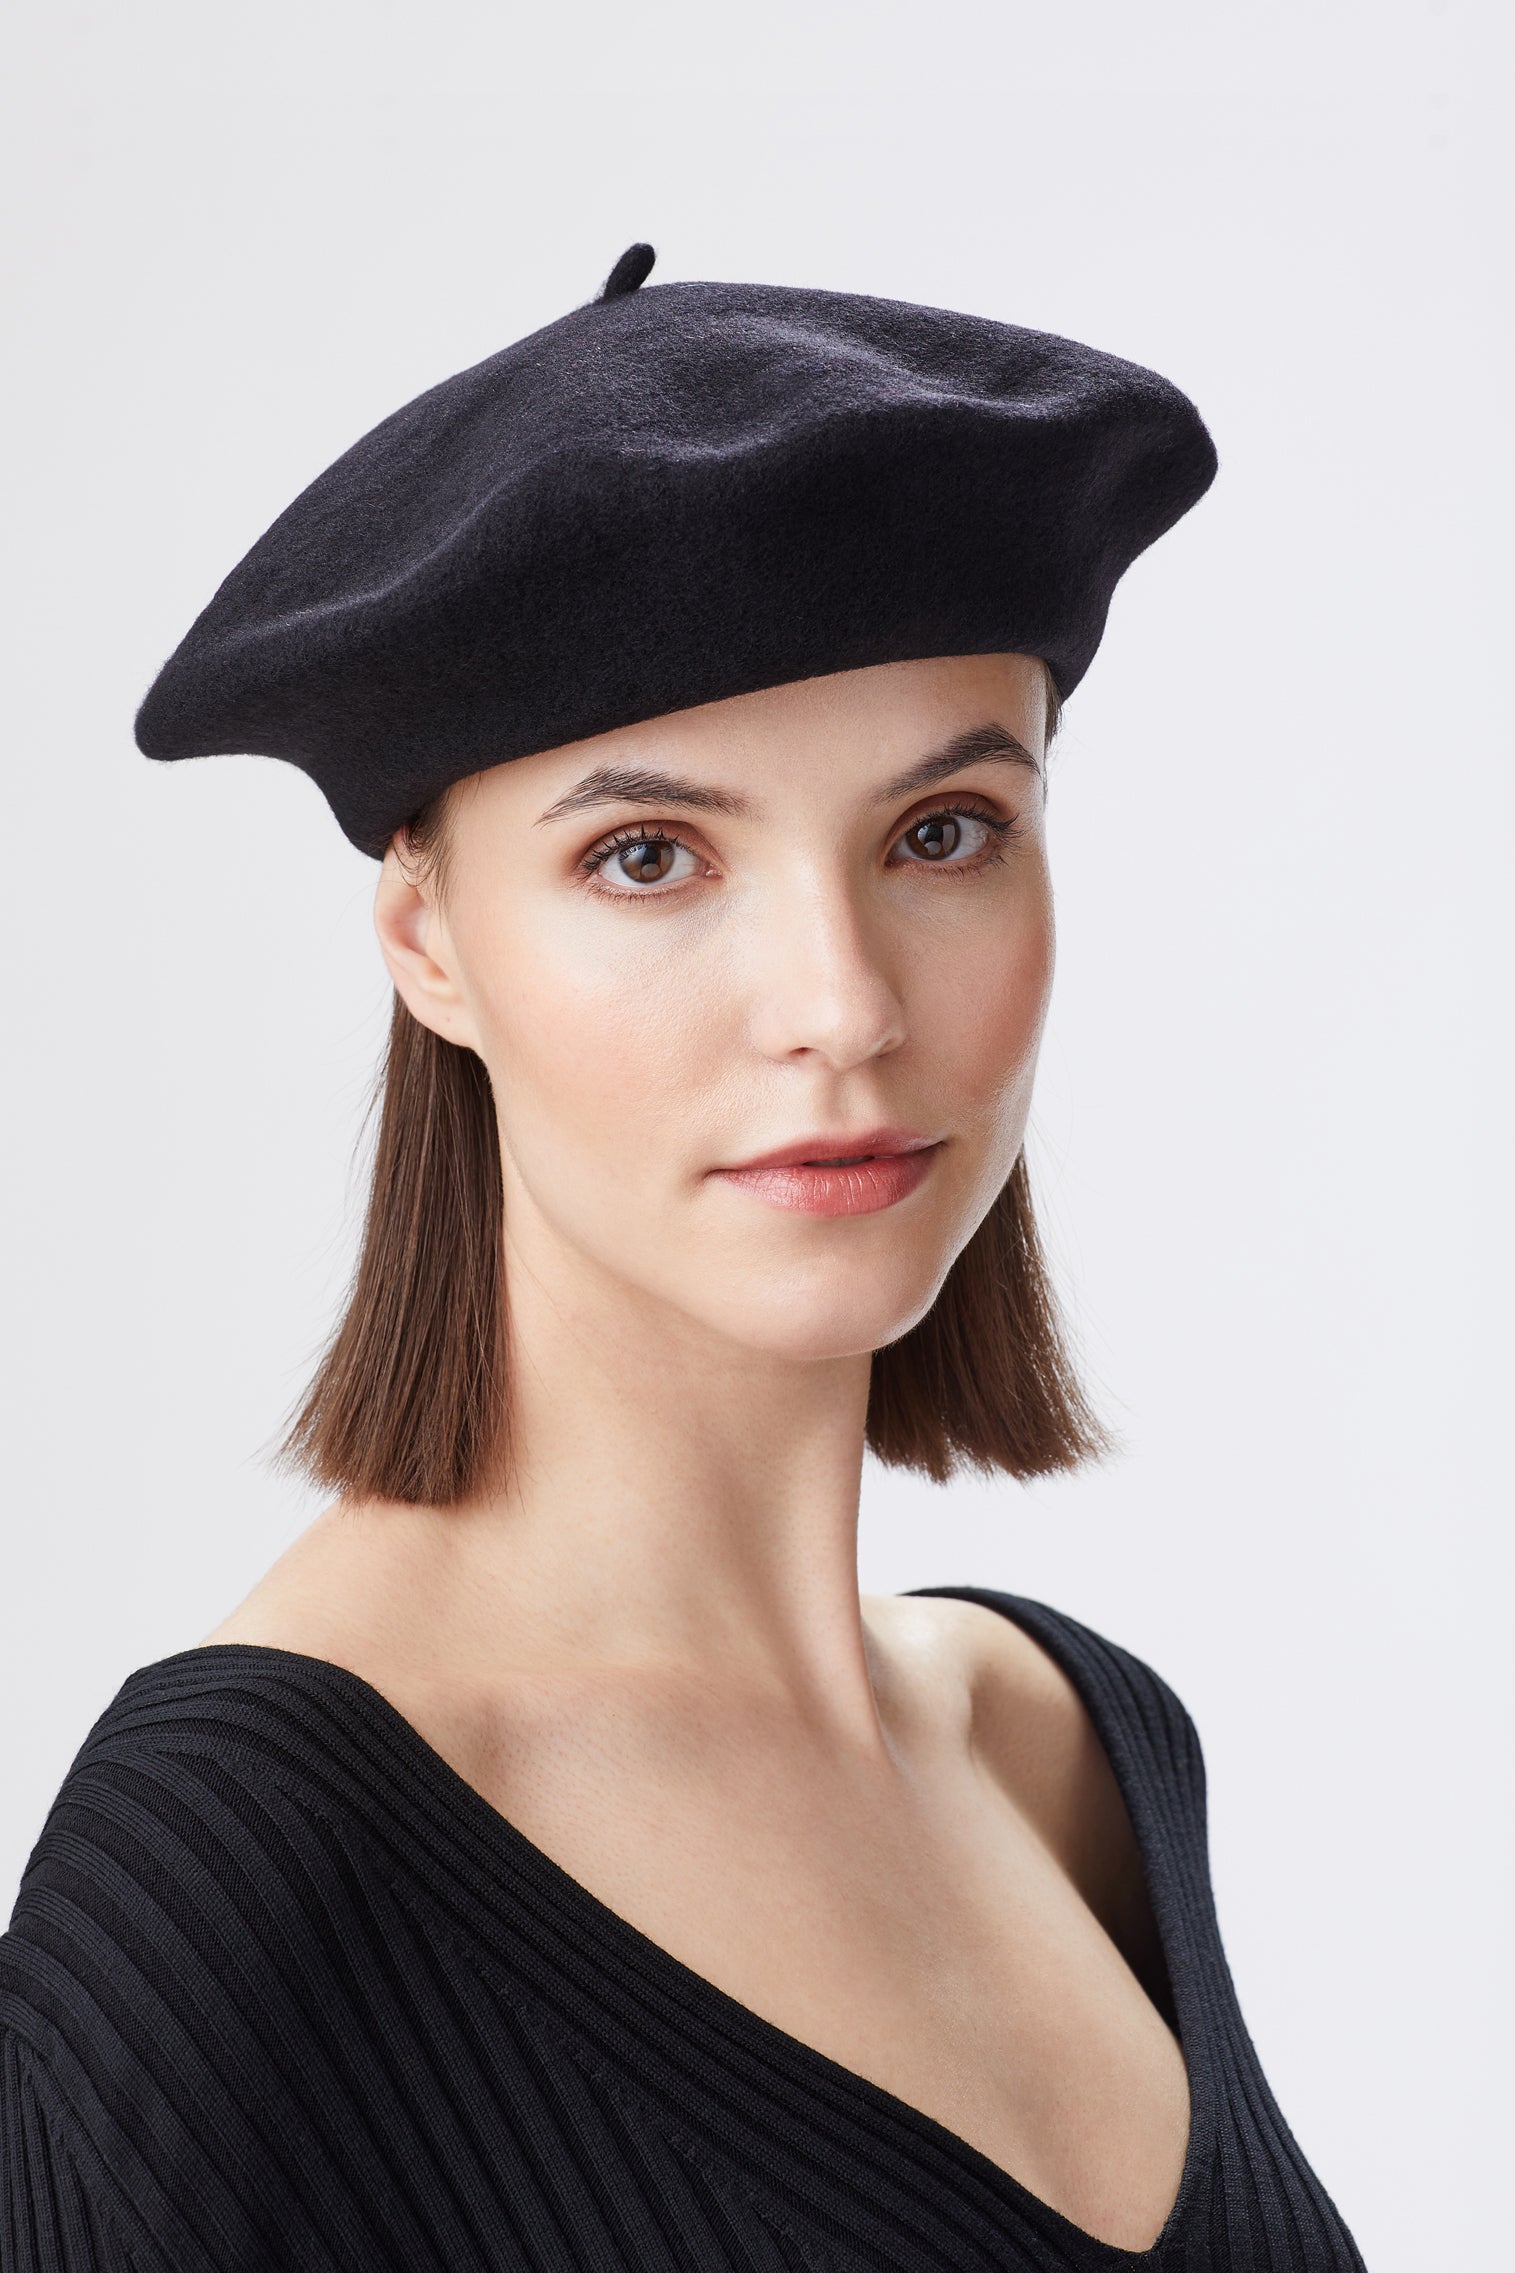 French Beret - You May Also Like - Lock & Co. Hatters London UK